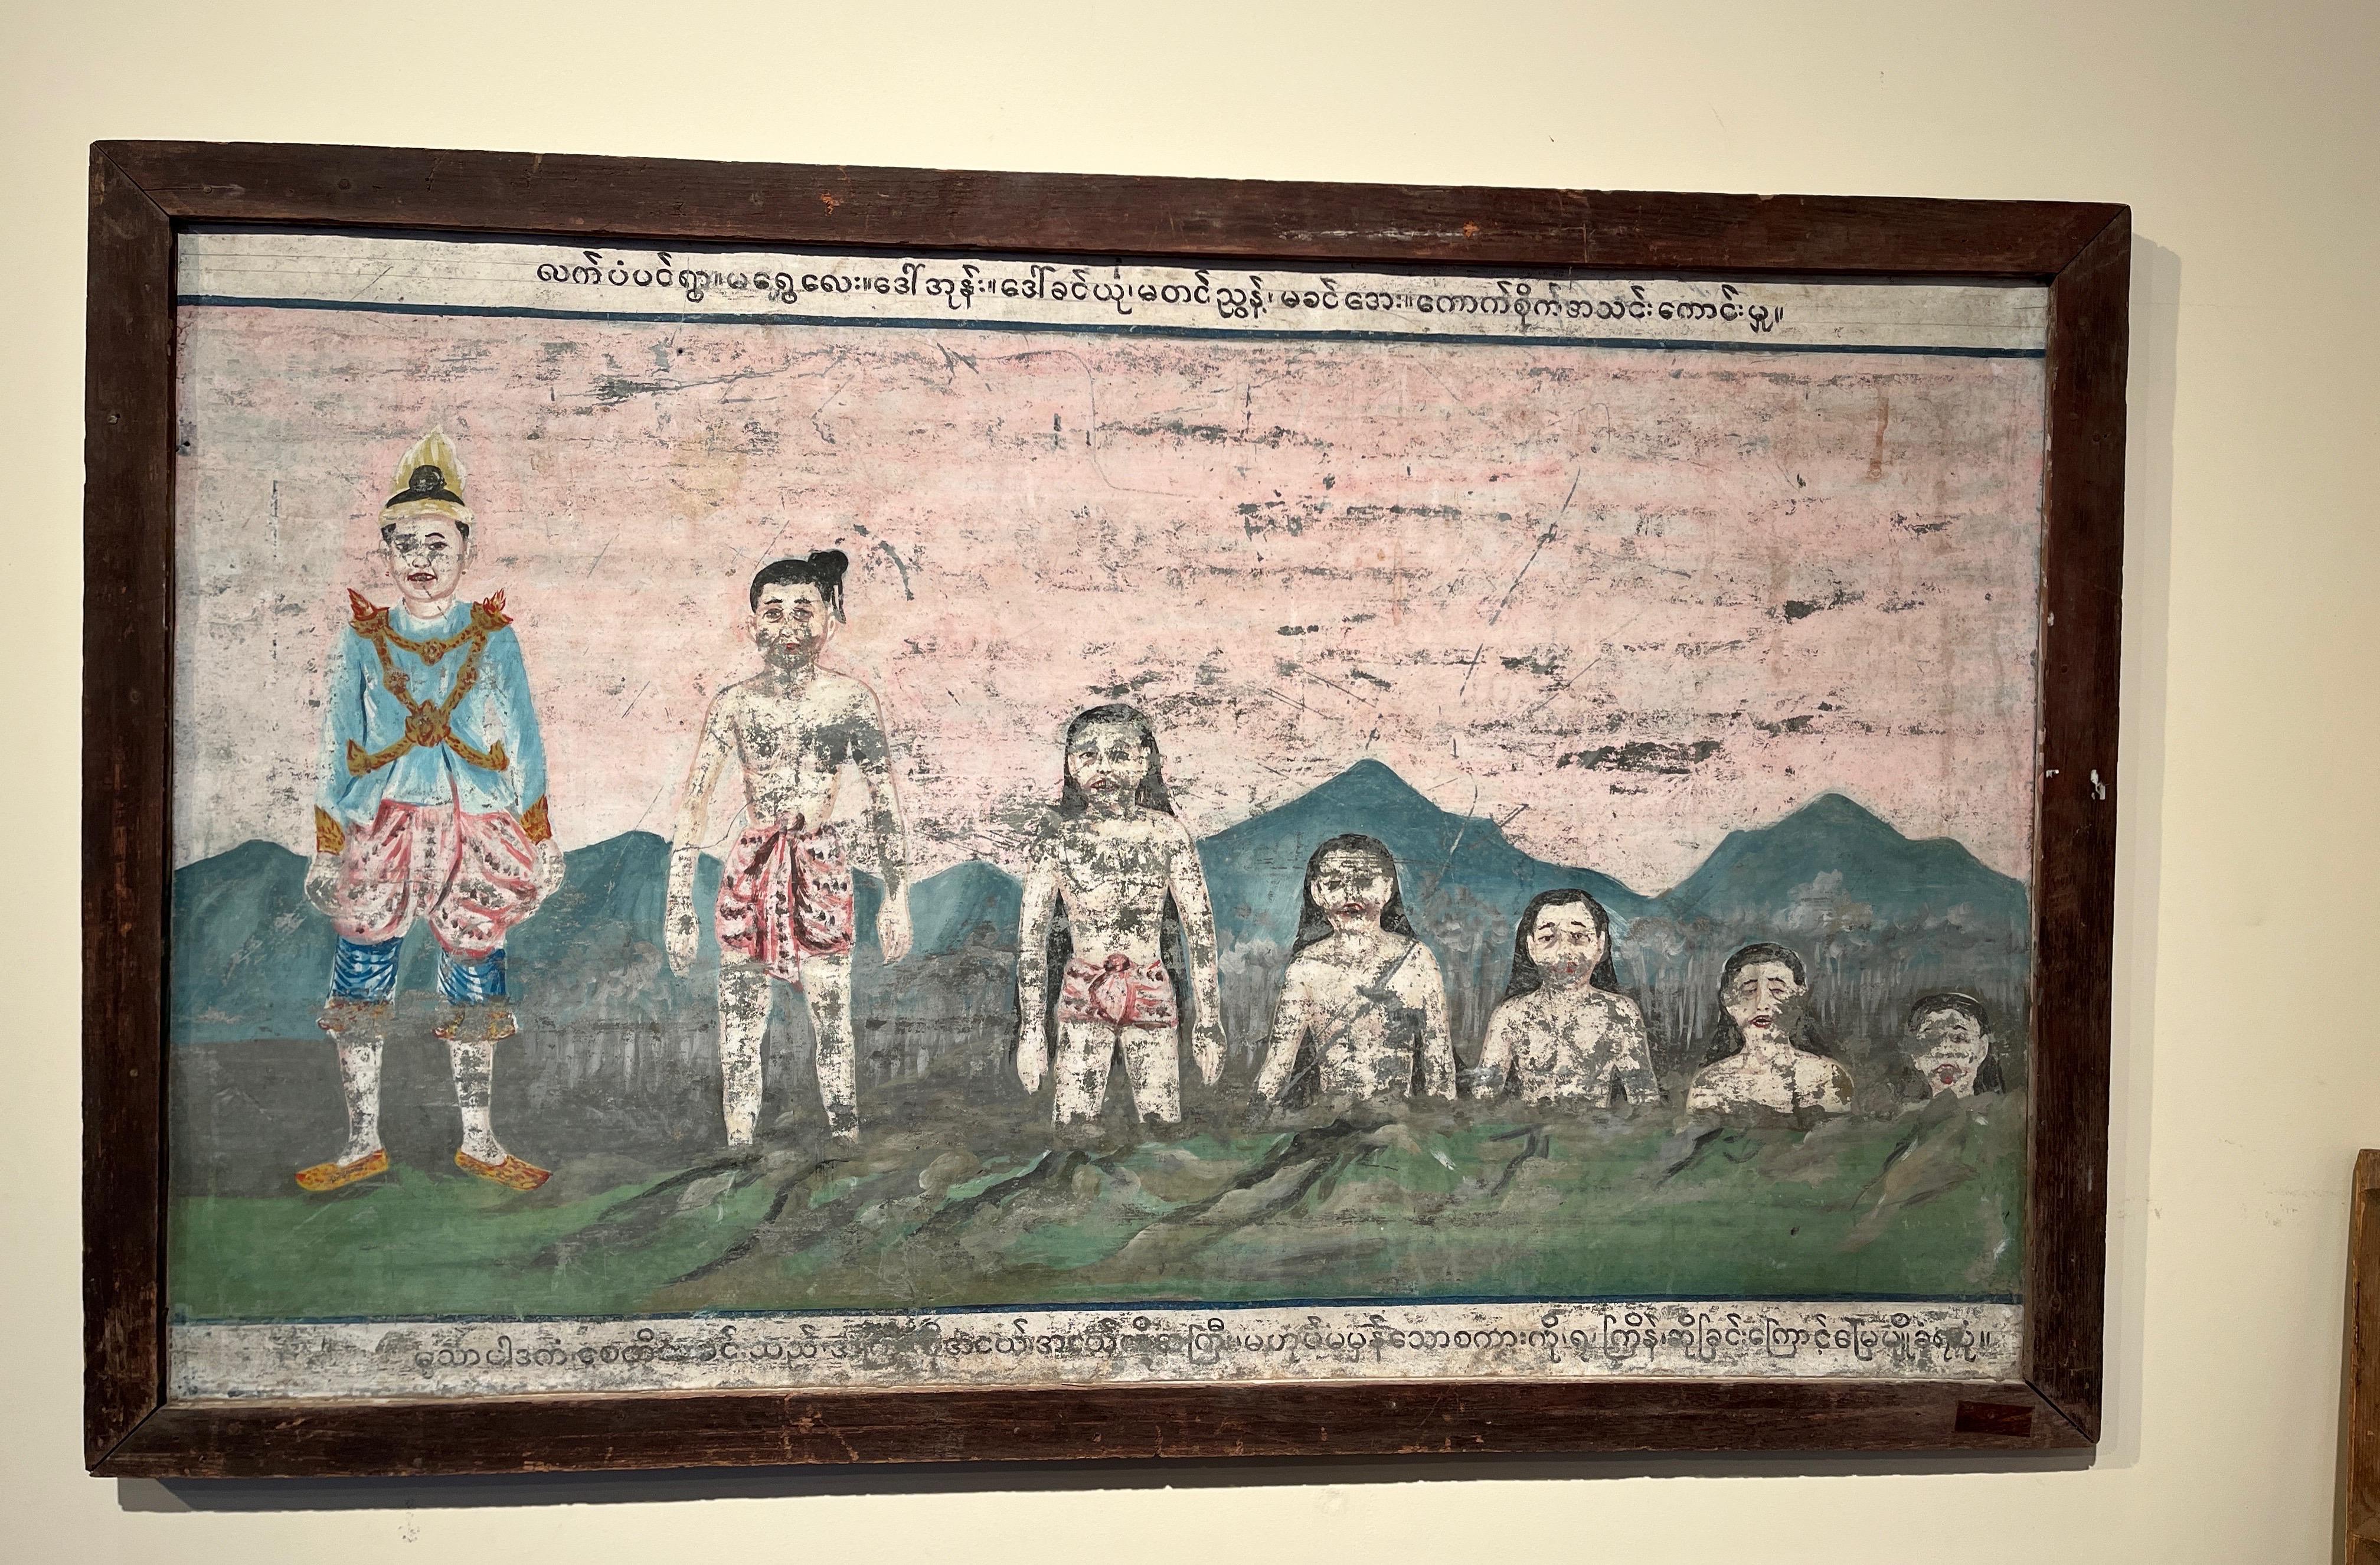 A large, beautiful and very unusual antique Burmese temple painting on tin. This Buddhist painting displays seven figures against a stunning background of worn and naturally faded pink and green paint. A simply framed piece that virtually glows on